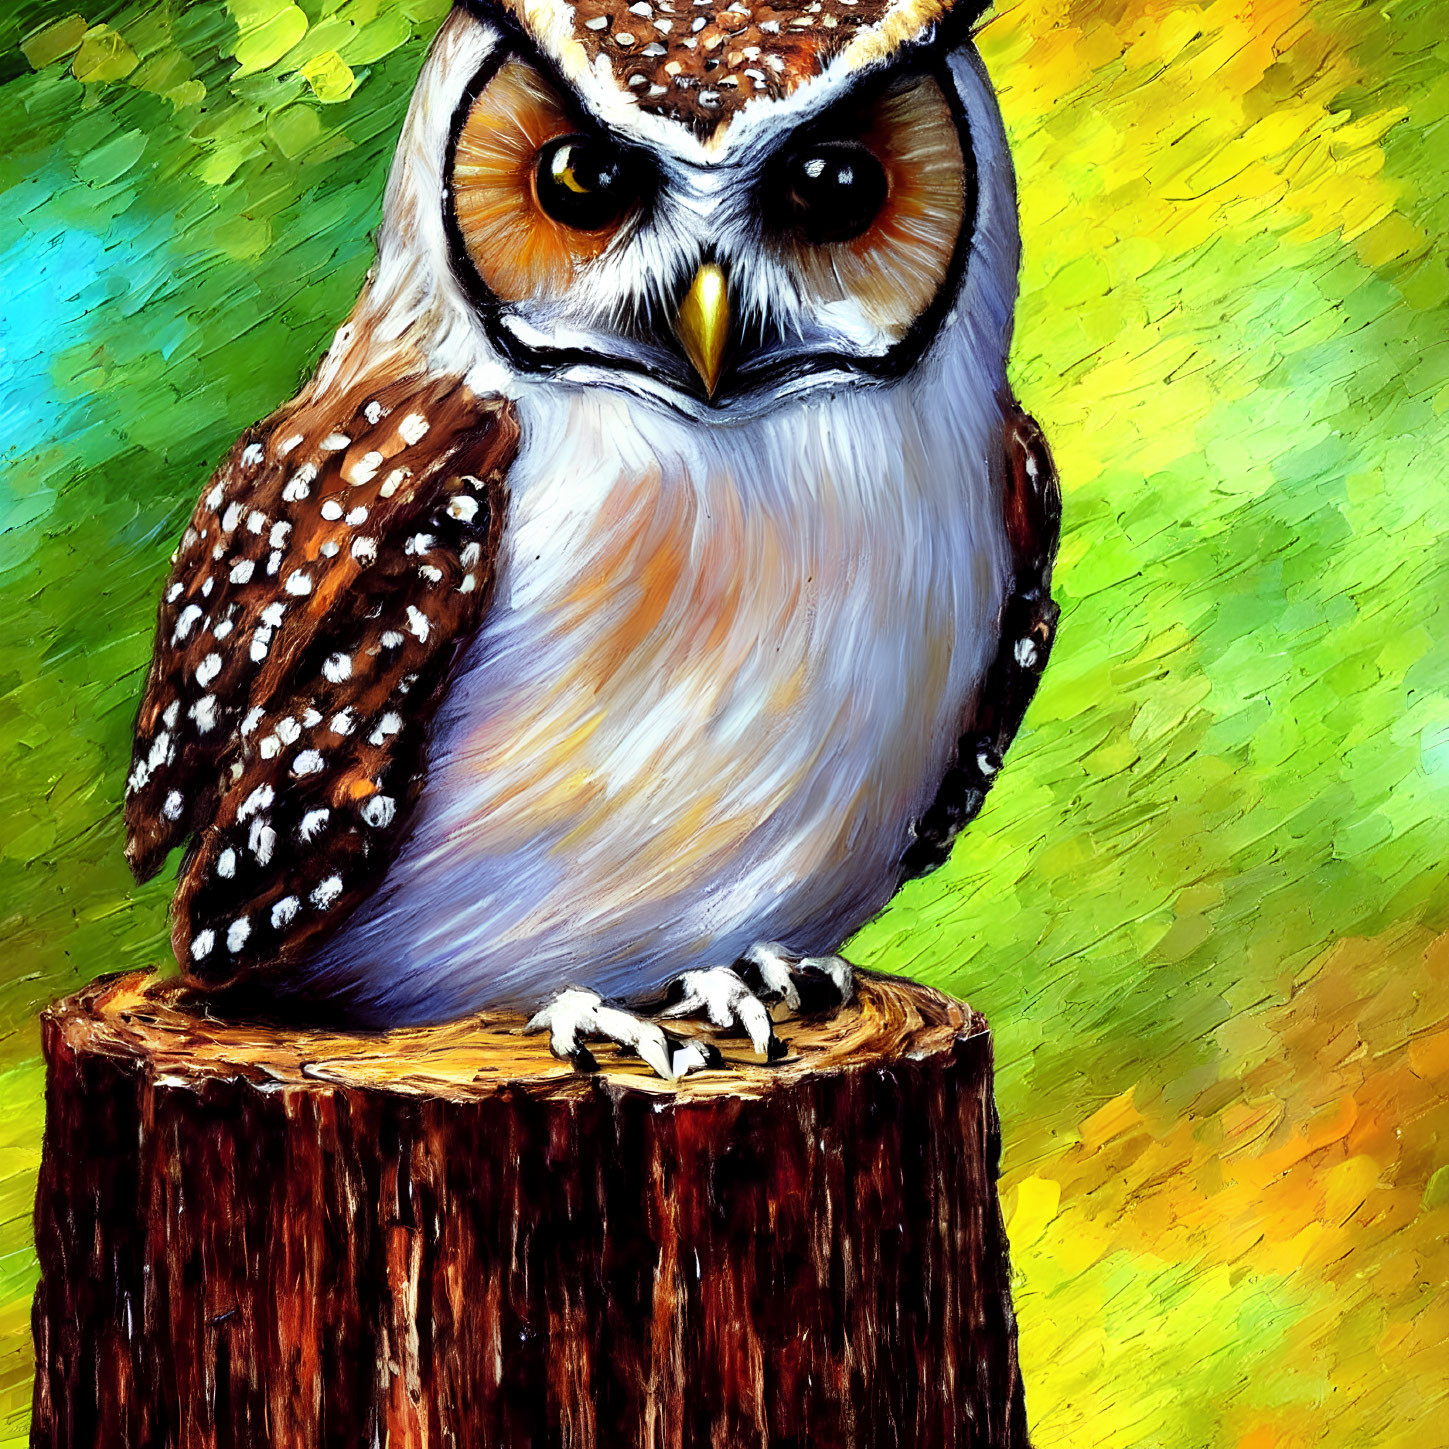 Colorful Owl Perched on Stump with Abstract Background